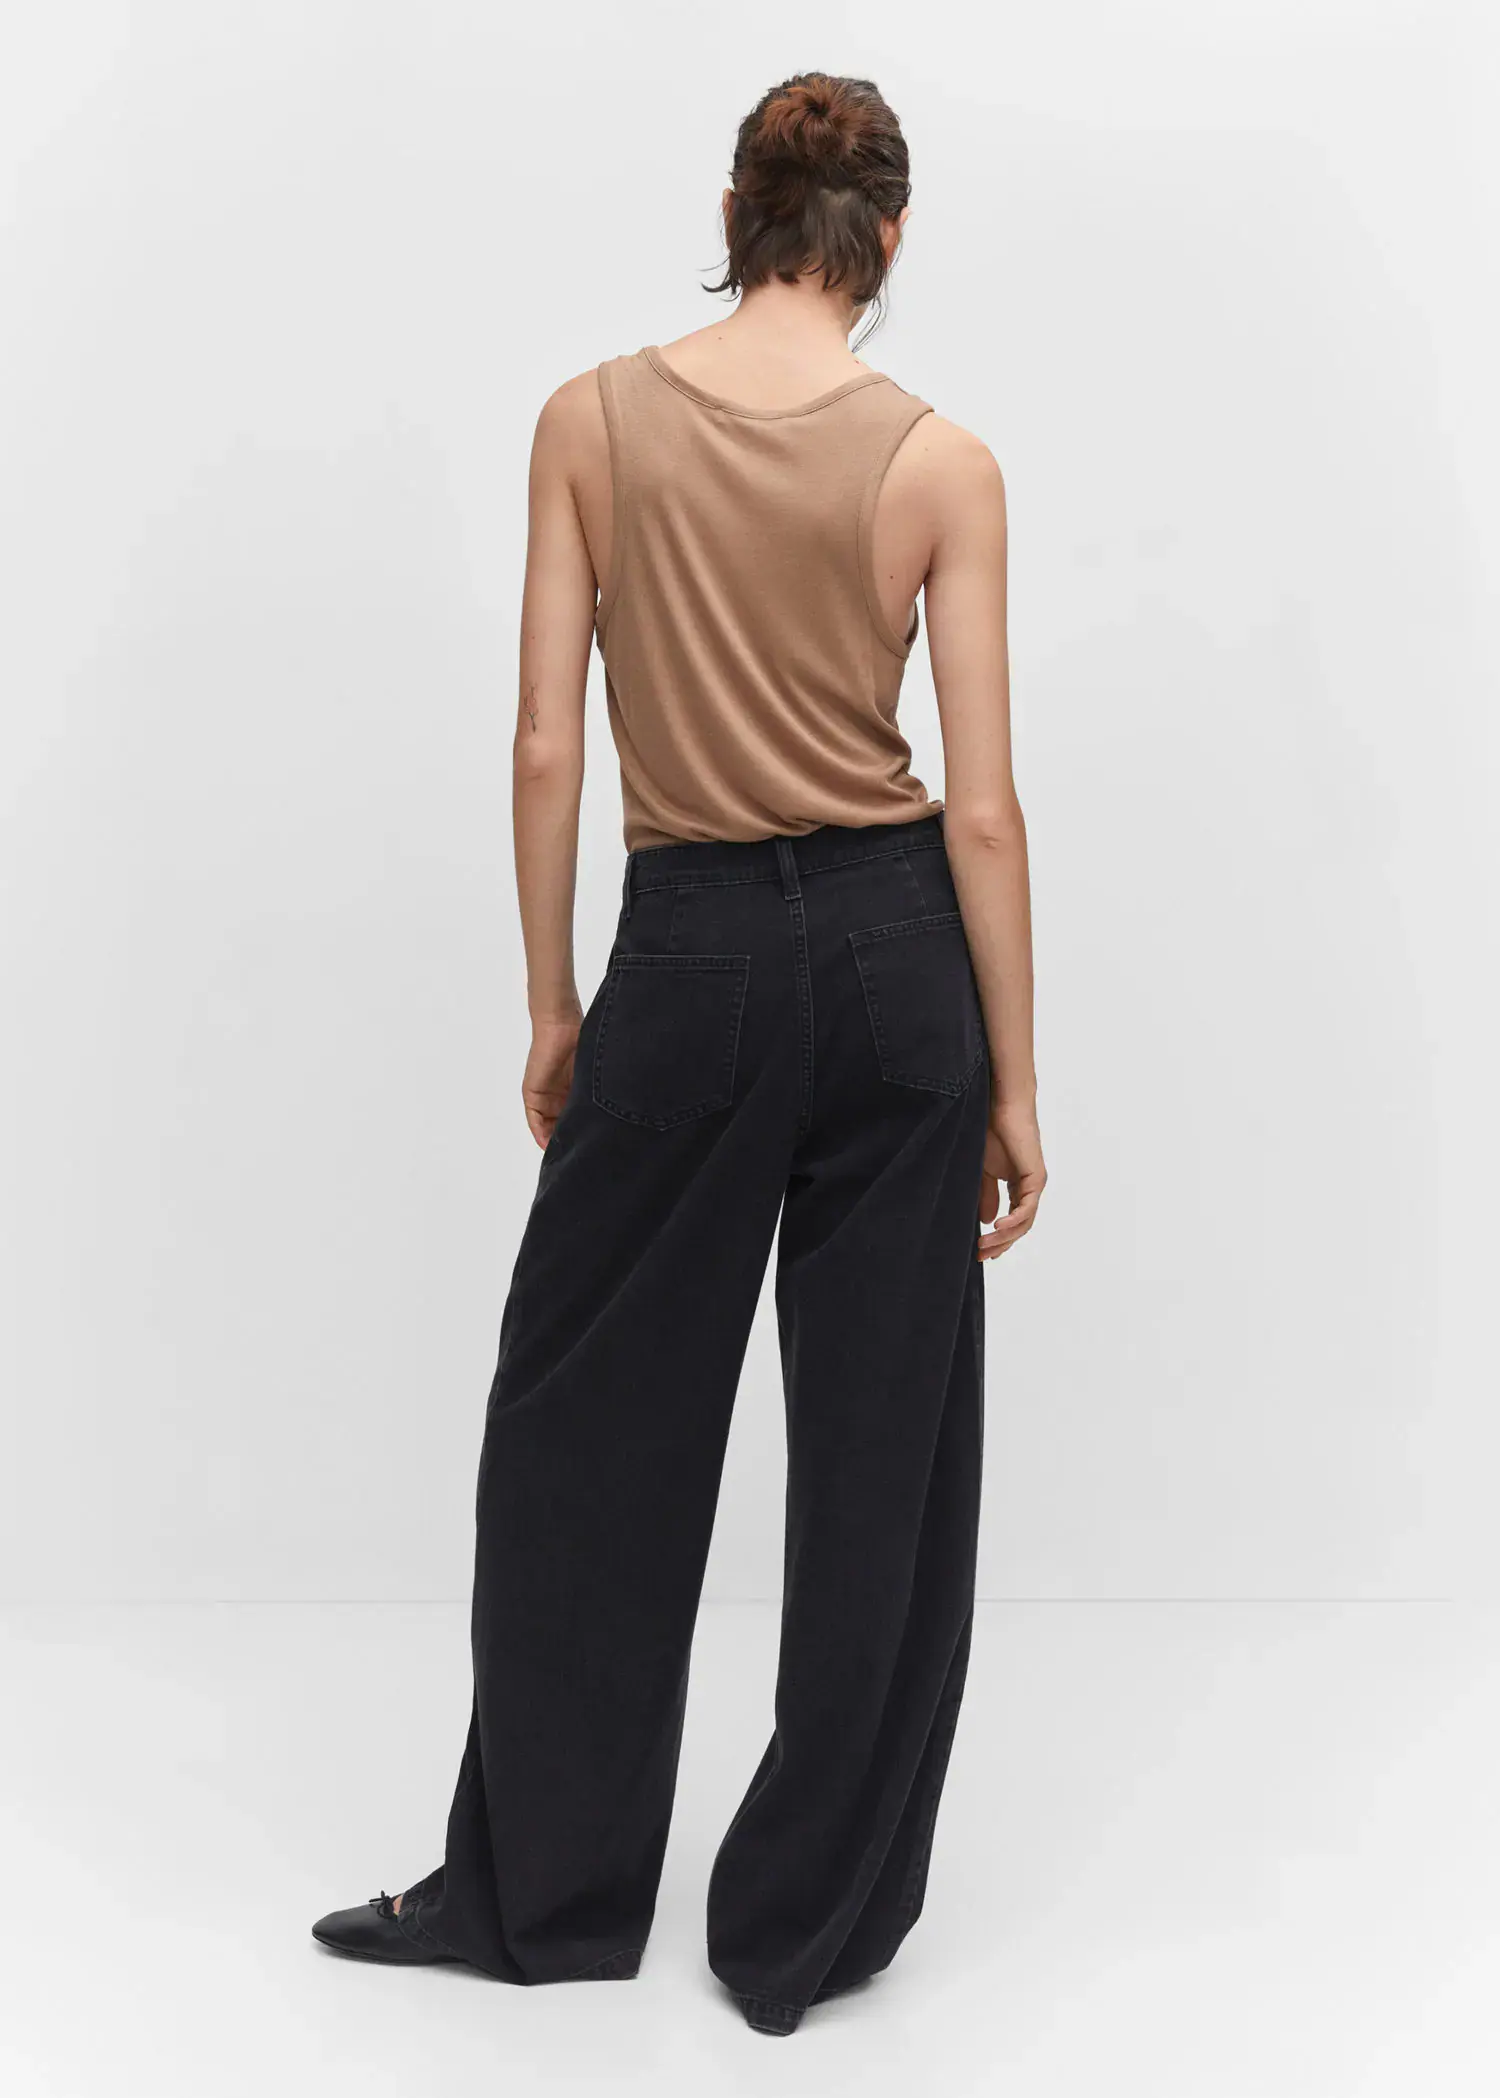 Mango Wide-leg pleated jeans. a woman wearing a tan tank top and black pants. 